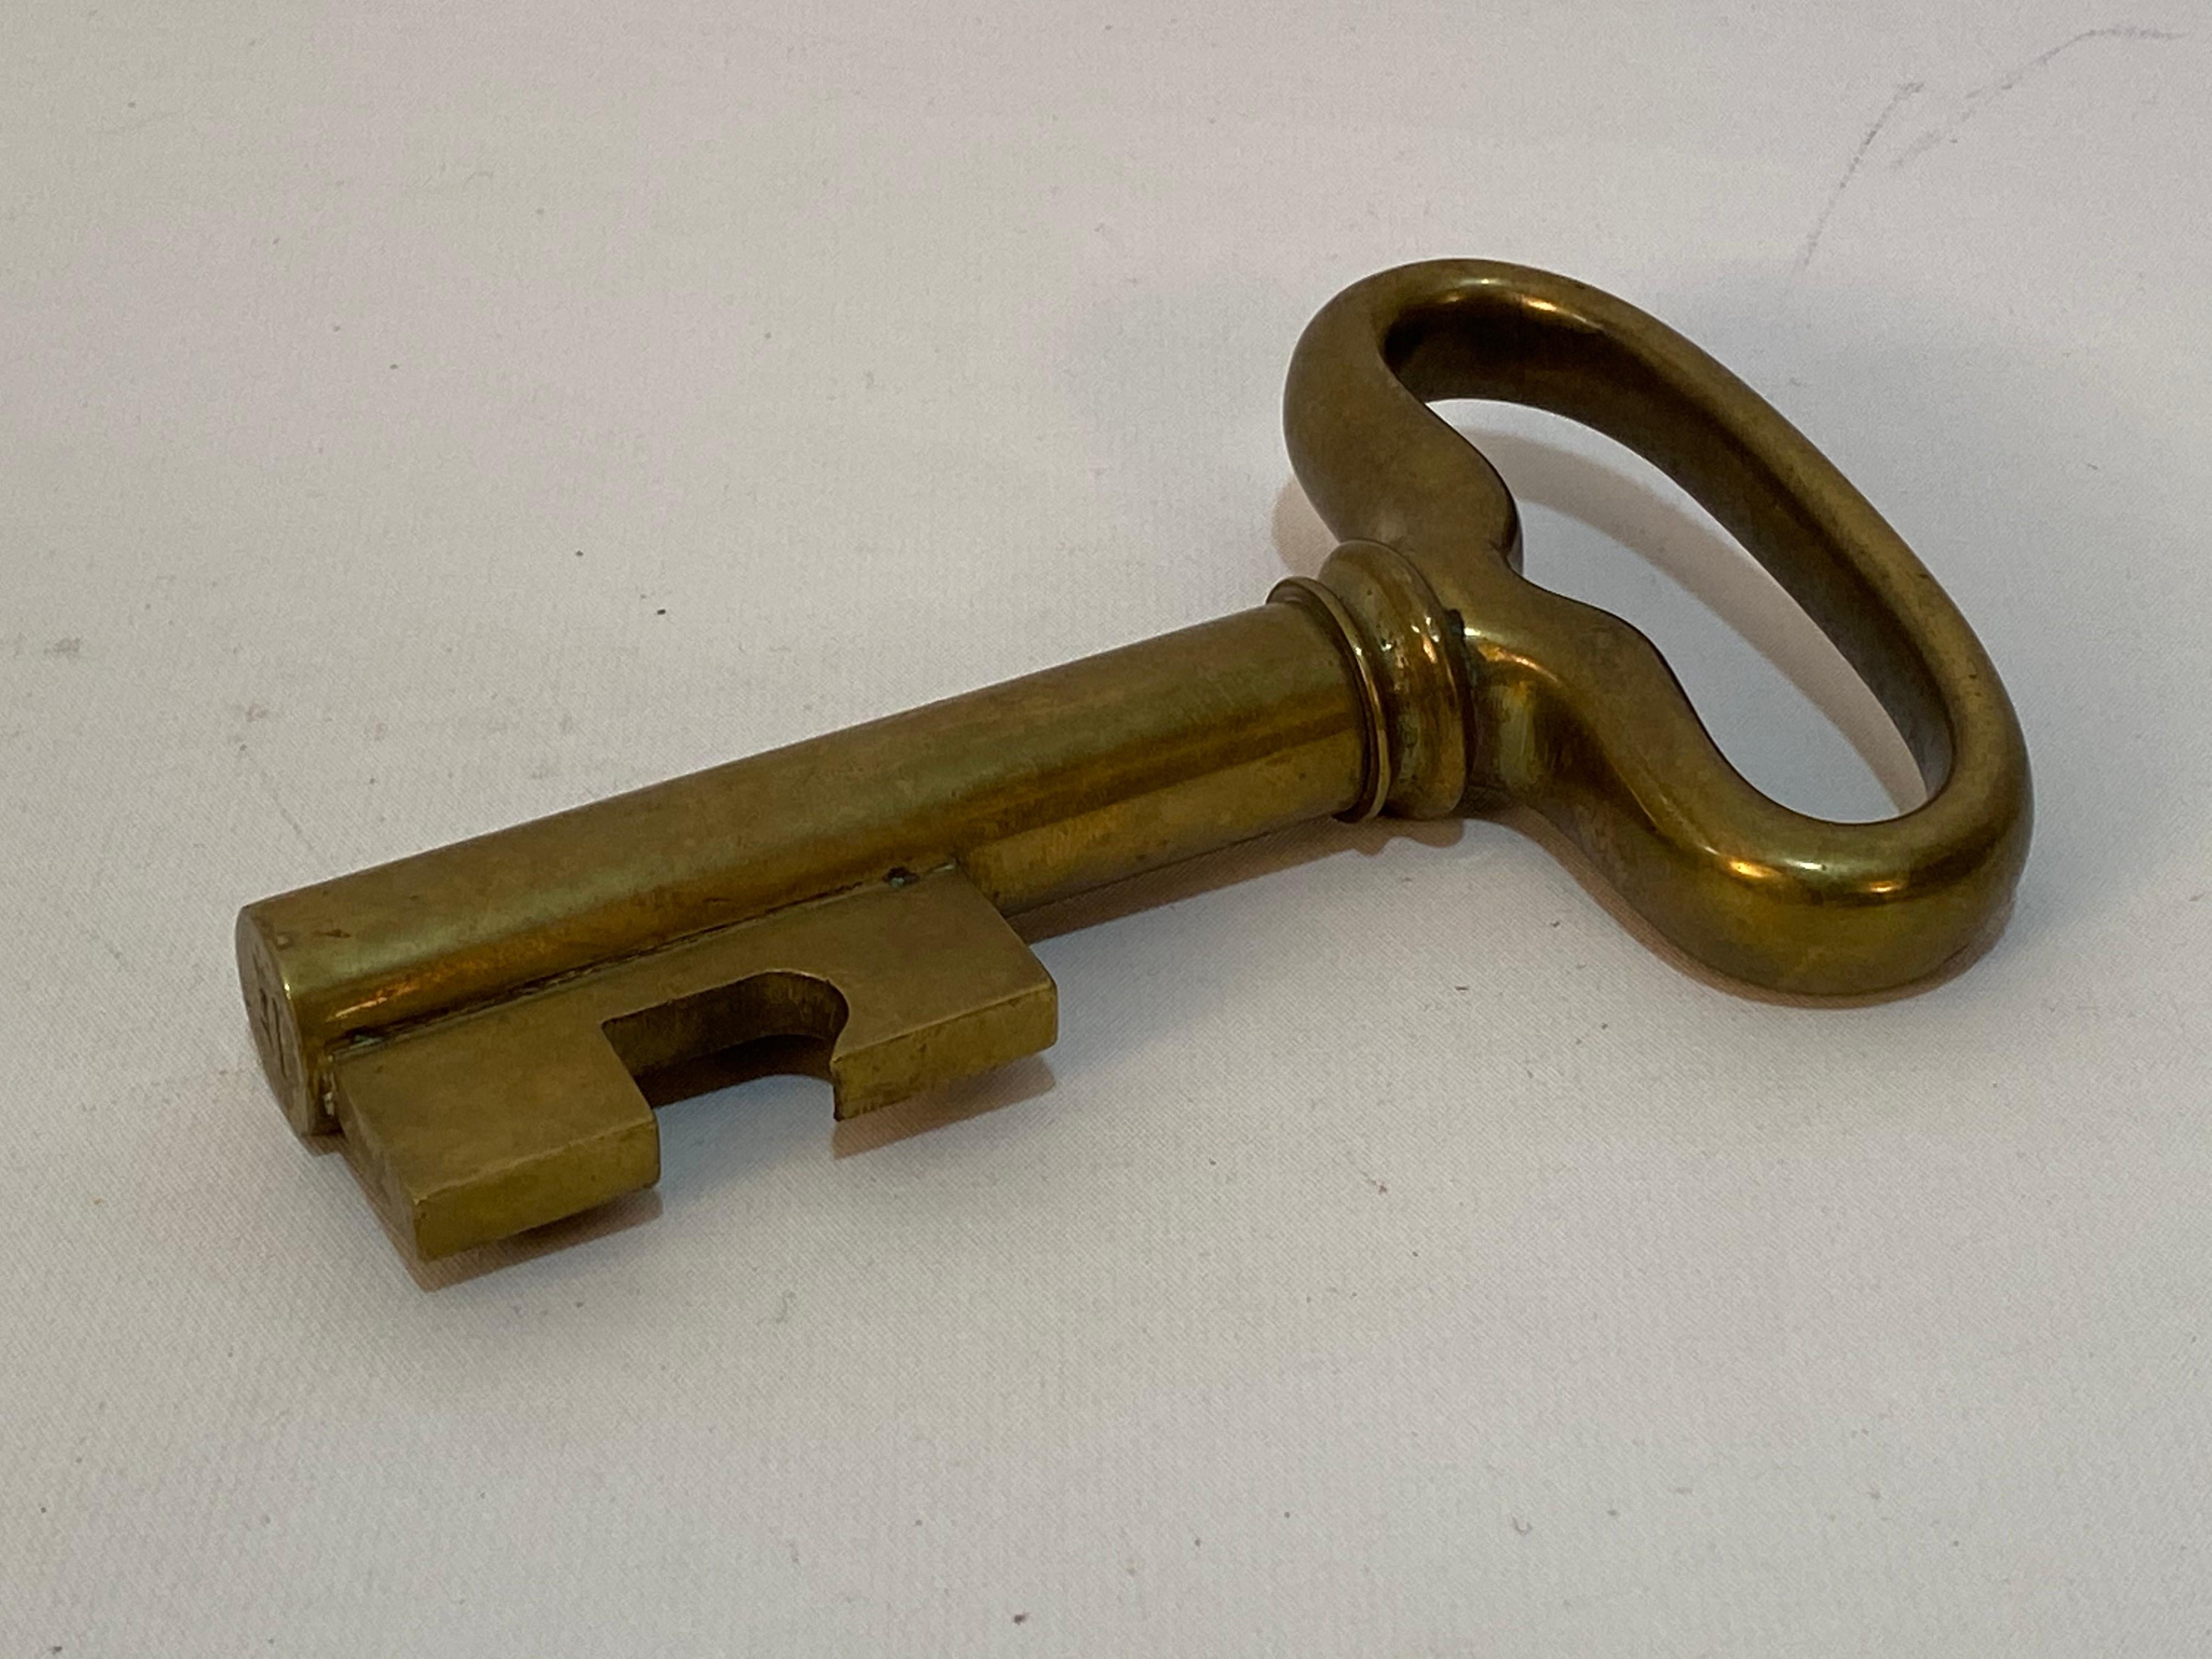 Carl Aubock solid brass key bottle opener and cork screw. Signed Aubock, Made in Austria. Circa 1950. Aubock designs are always a sign of quality, beauty and functional art. Very good condition with some minor tarnish. Lightly used. Some verdi gris